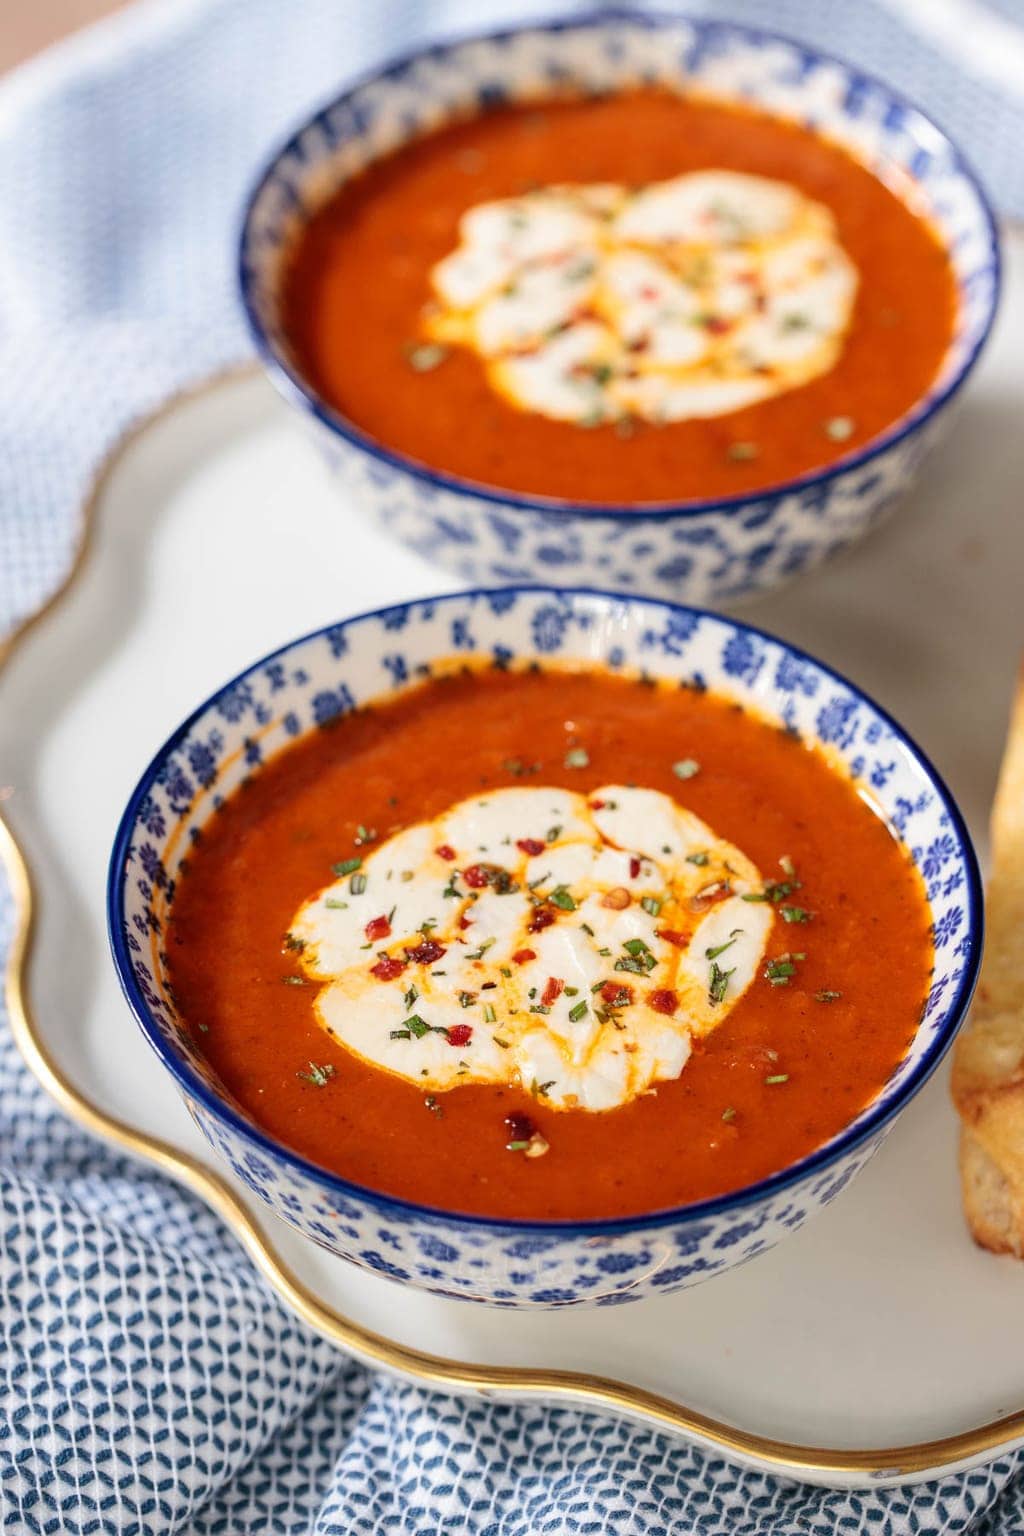 Vertical closeup photo of Roasted Red Pepper Tomato Soup topped with melted mozzarella cheese in blue and white patterned serving bowls.